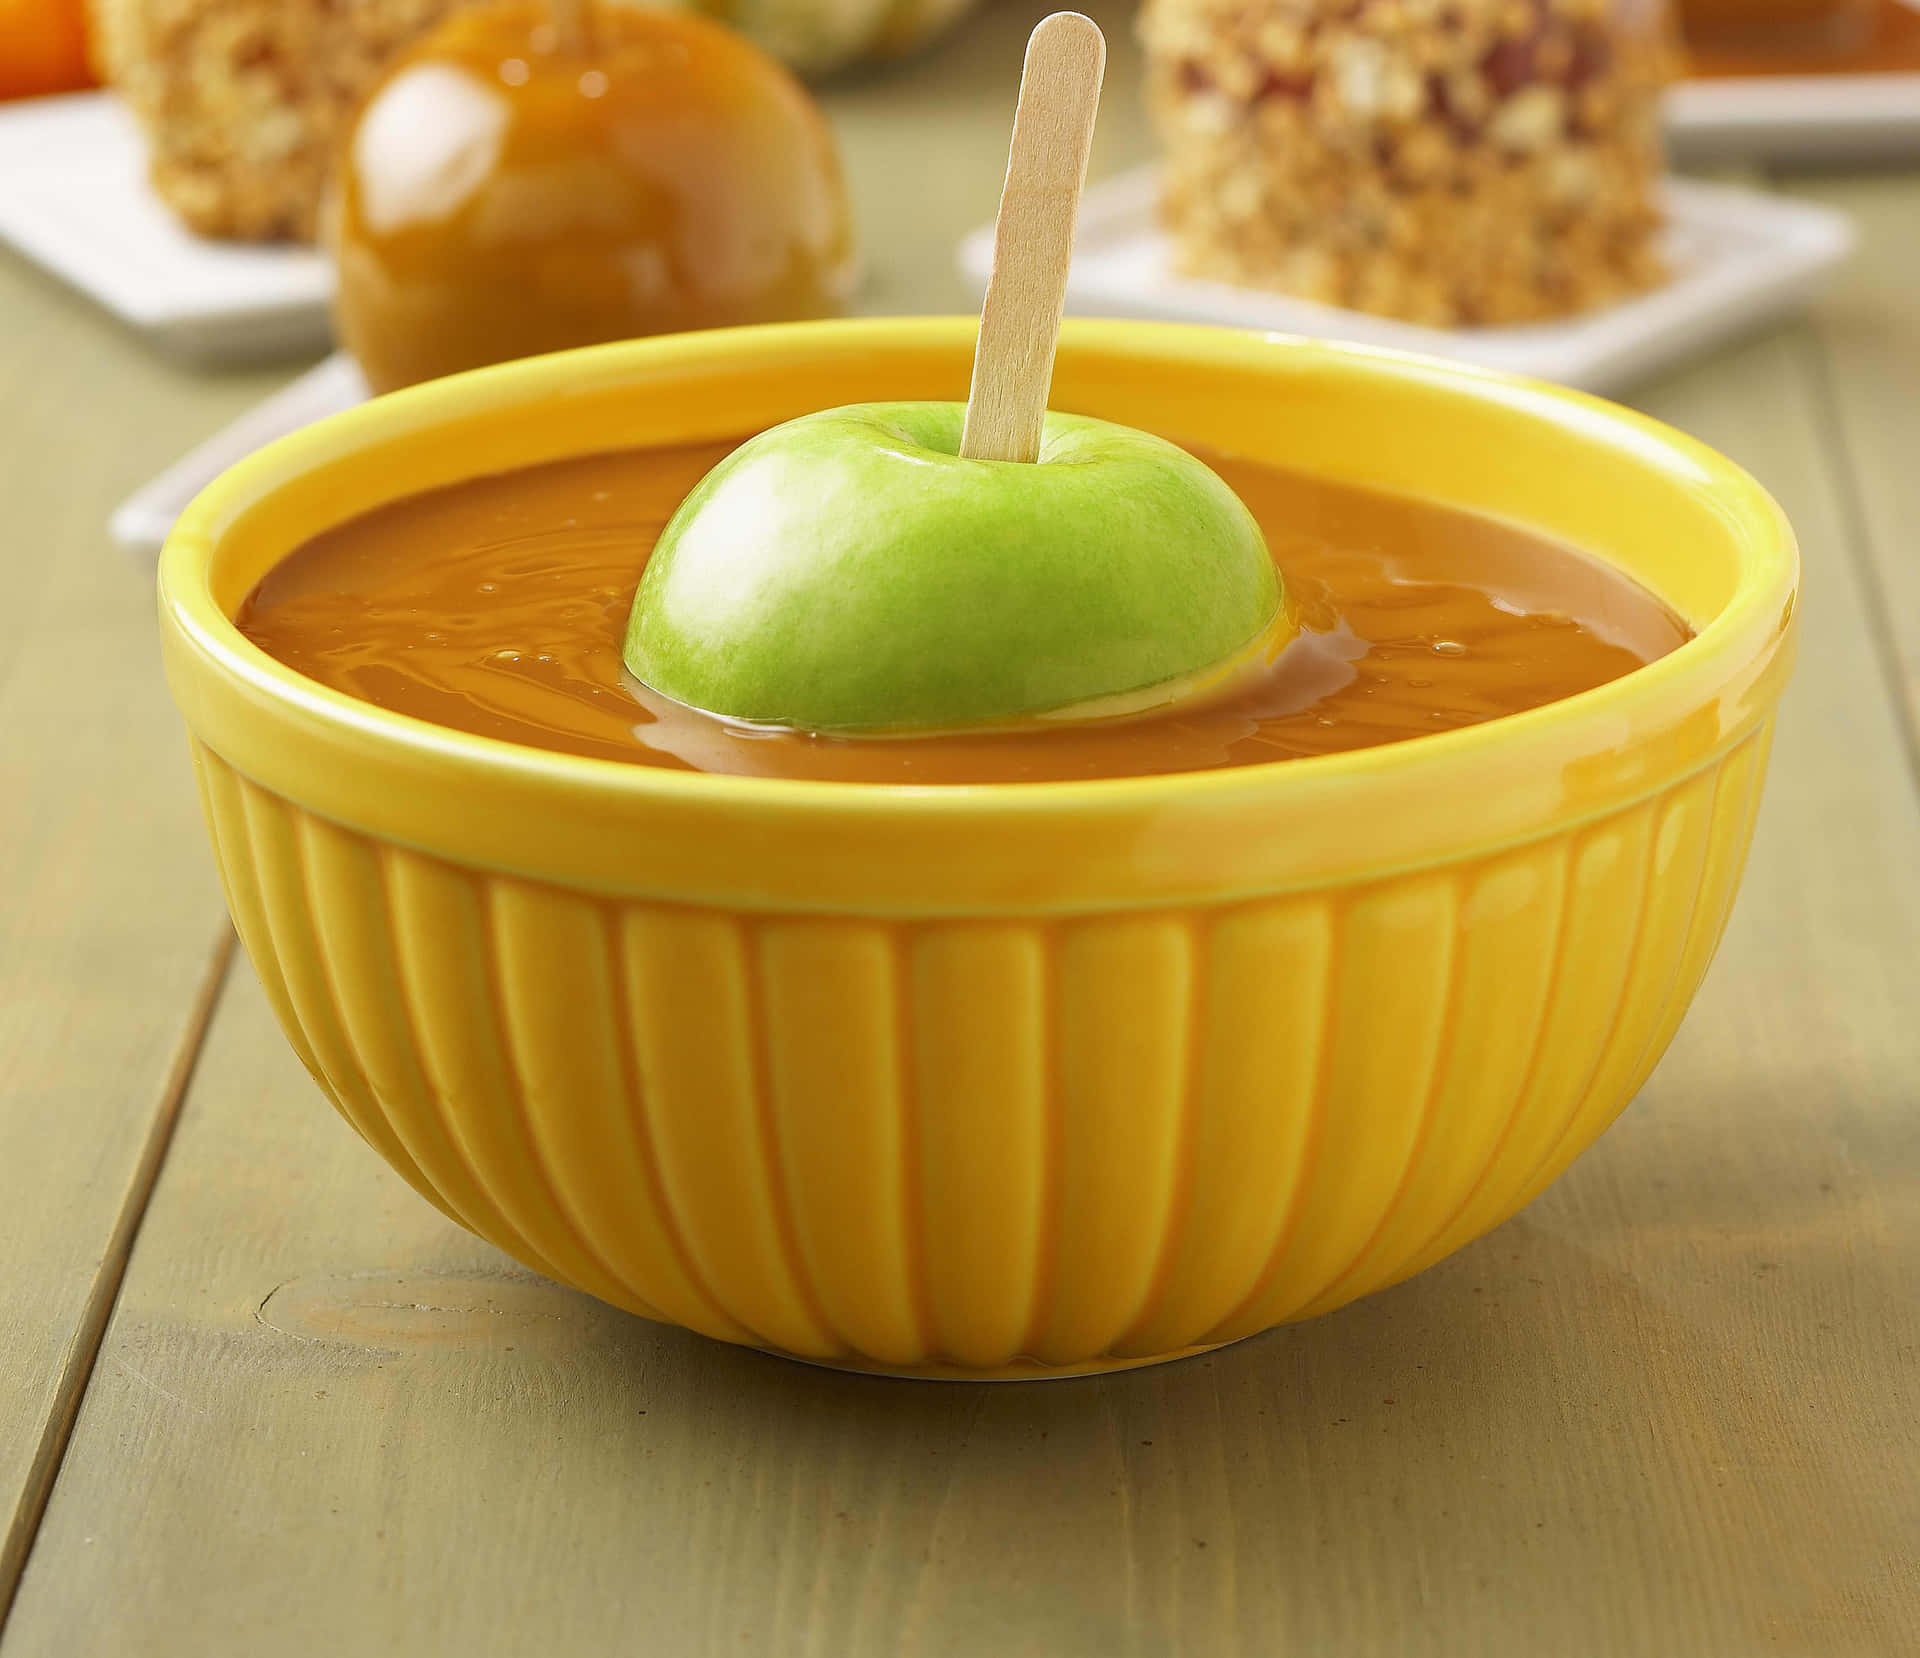 Delicious Caramel Apples on a Rustic Table Wallpaper